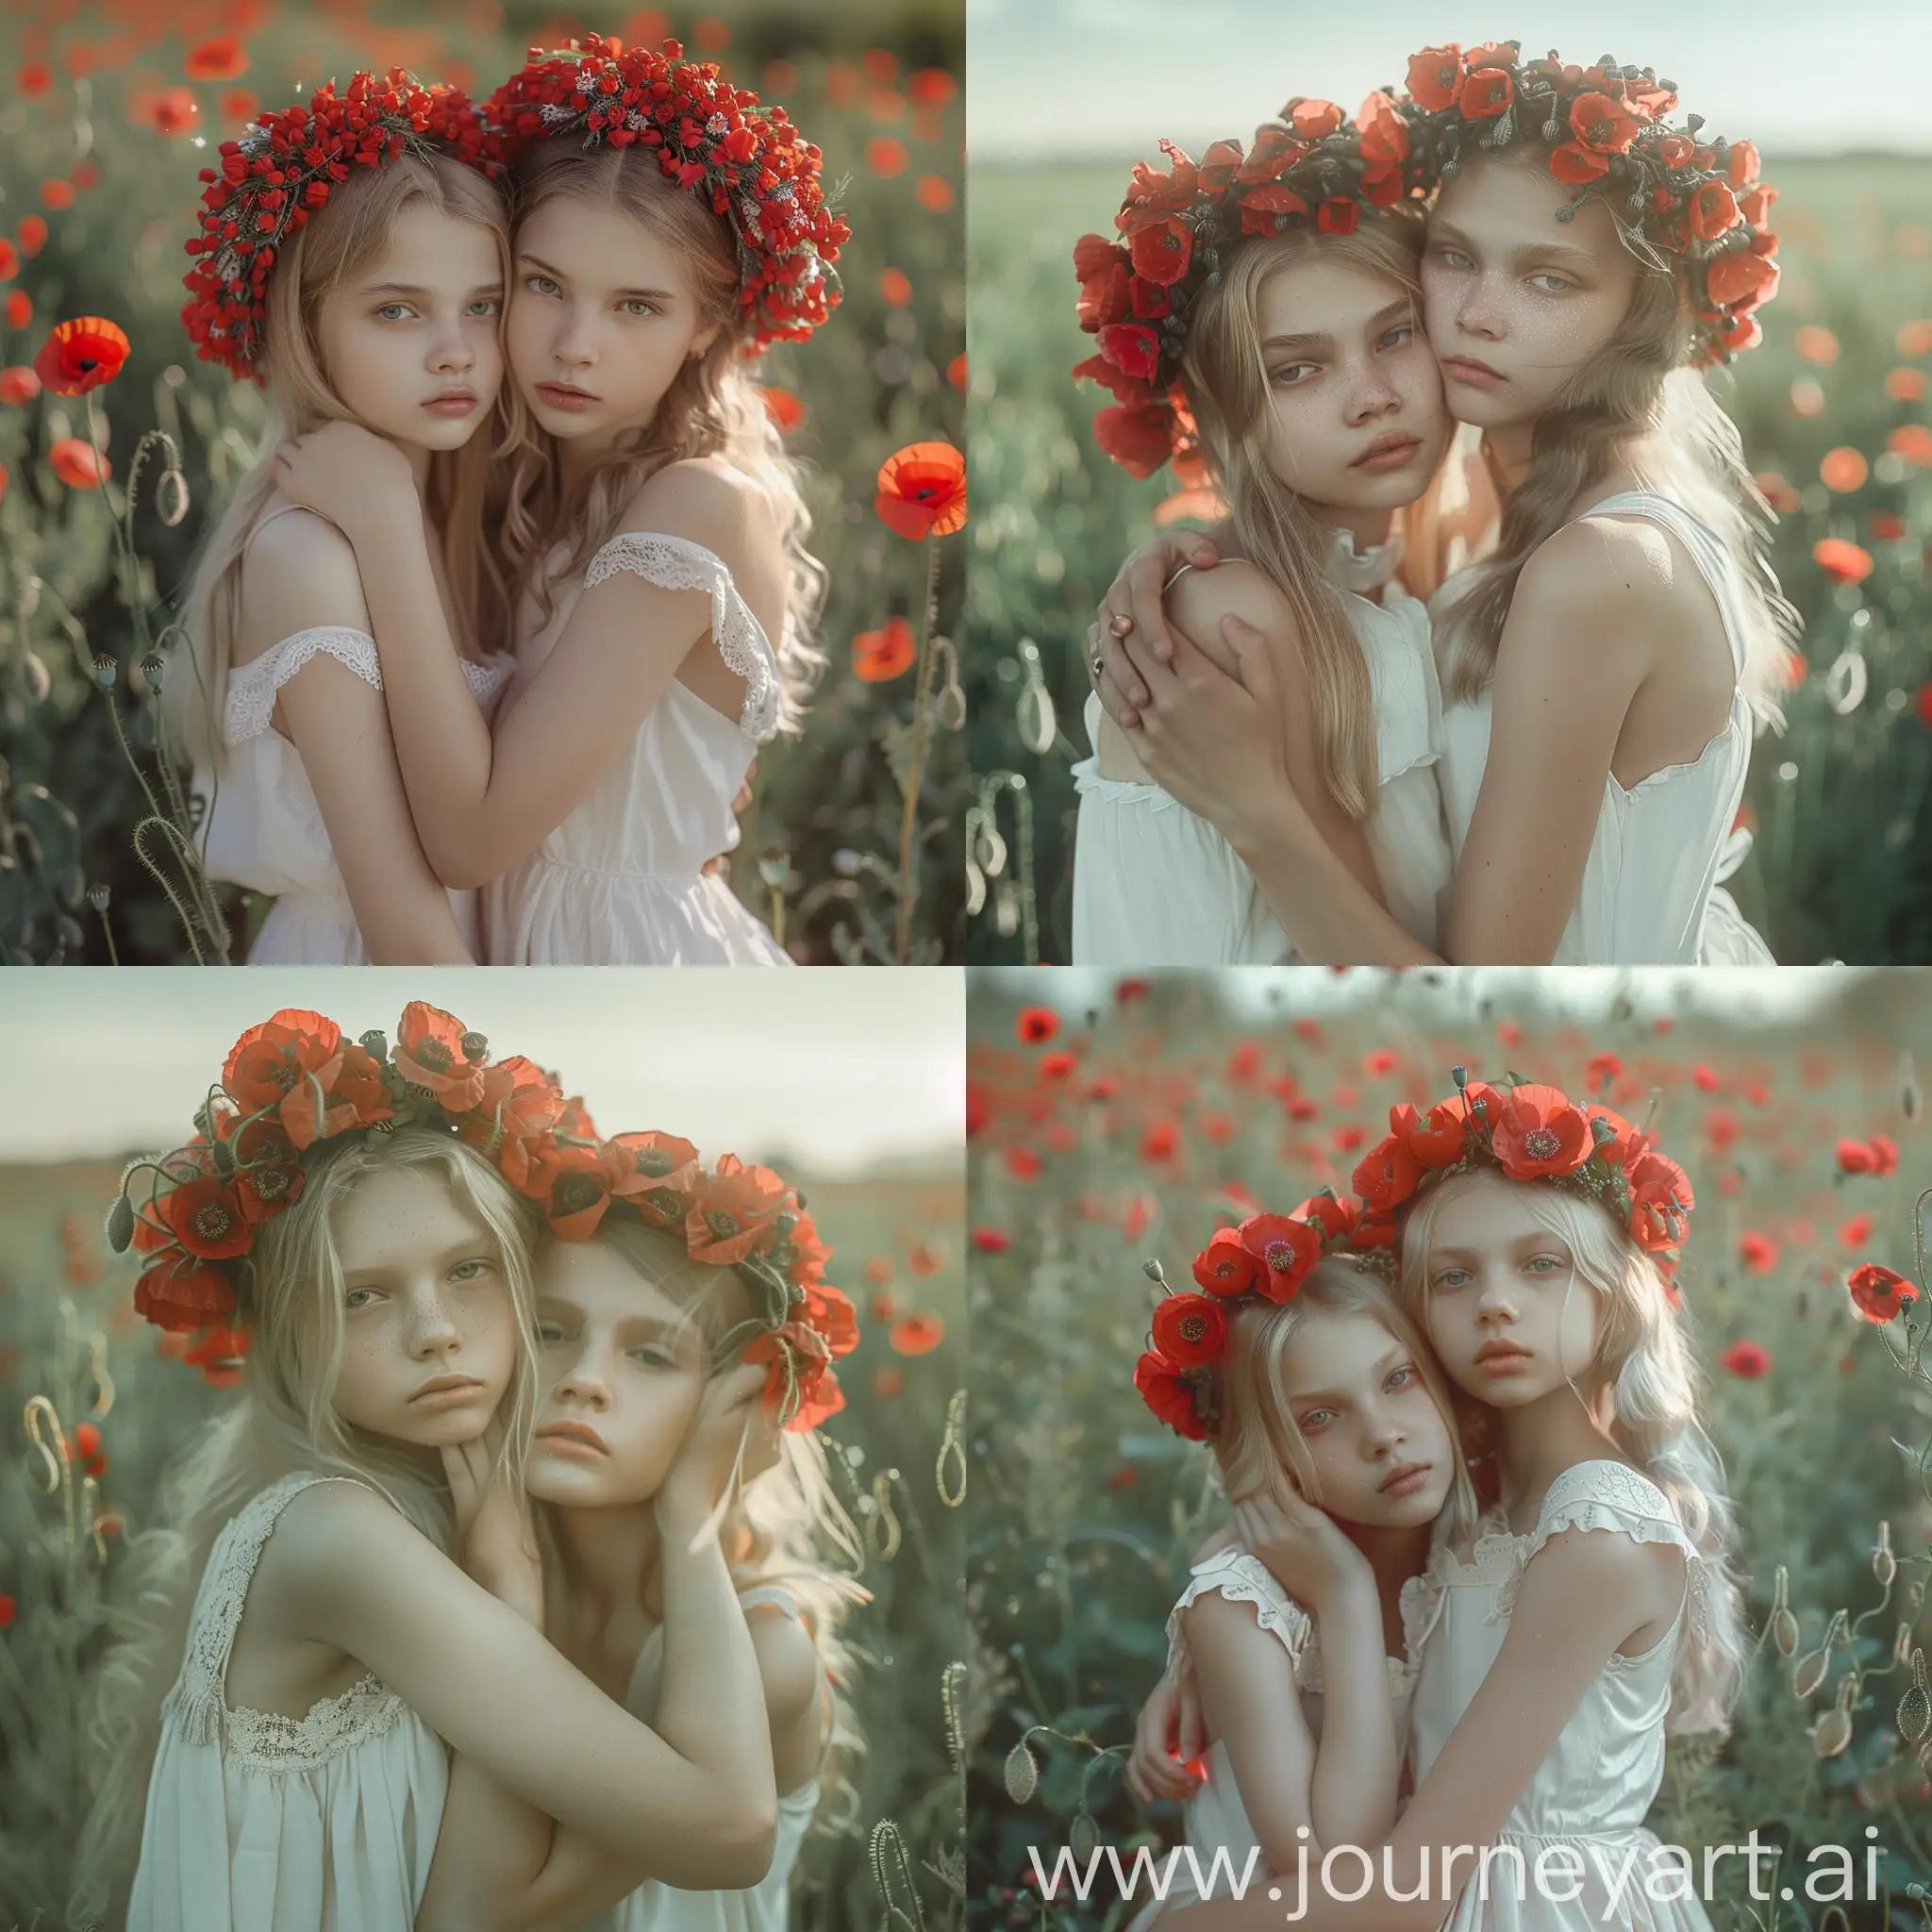 Sisters-in-White-Dresses-with-Red-Poppy-Wreaths